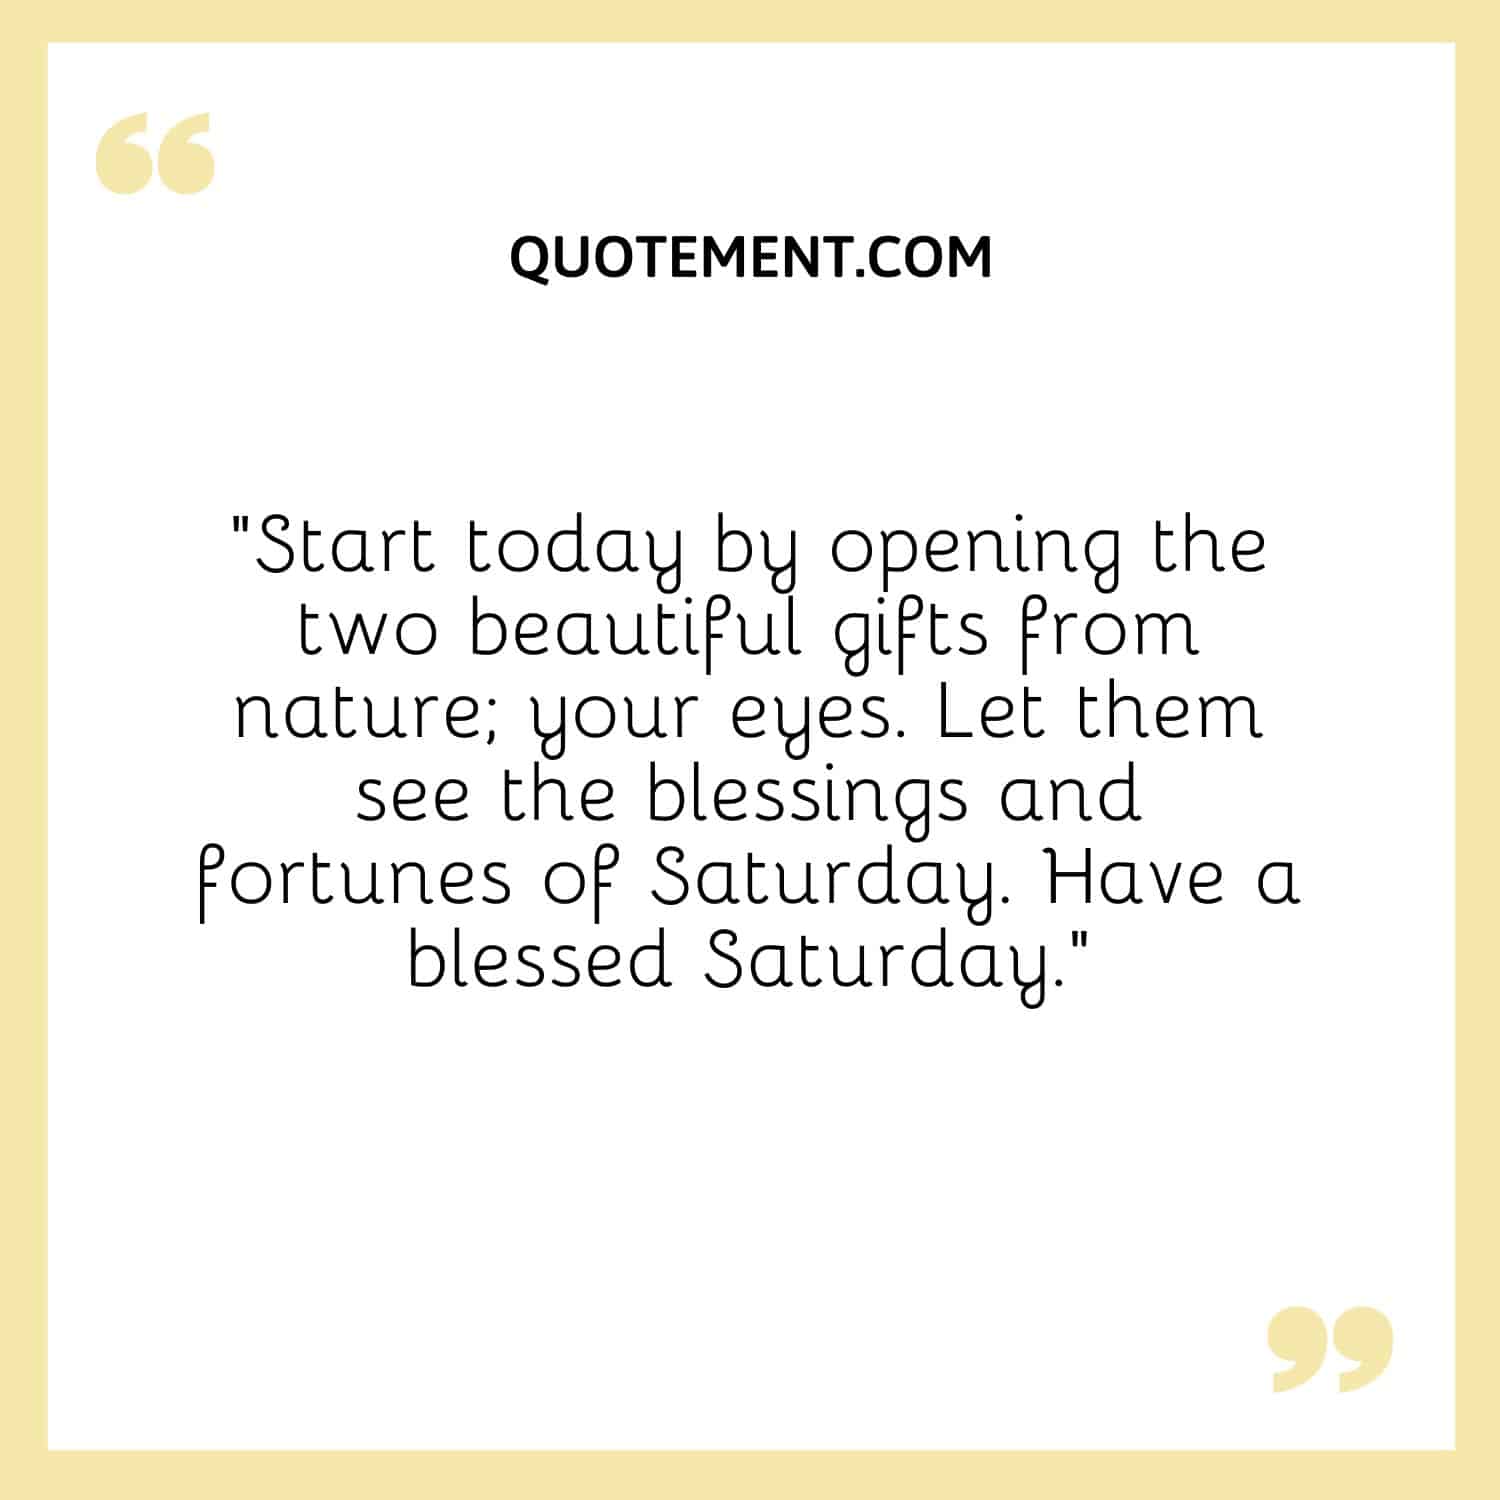 “Start today by opening the two beautiful gifts from nature; your eyes. Let them see the blessings and fortunes of Saturday. Have a blessed Saturday.”